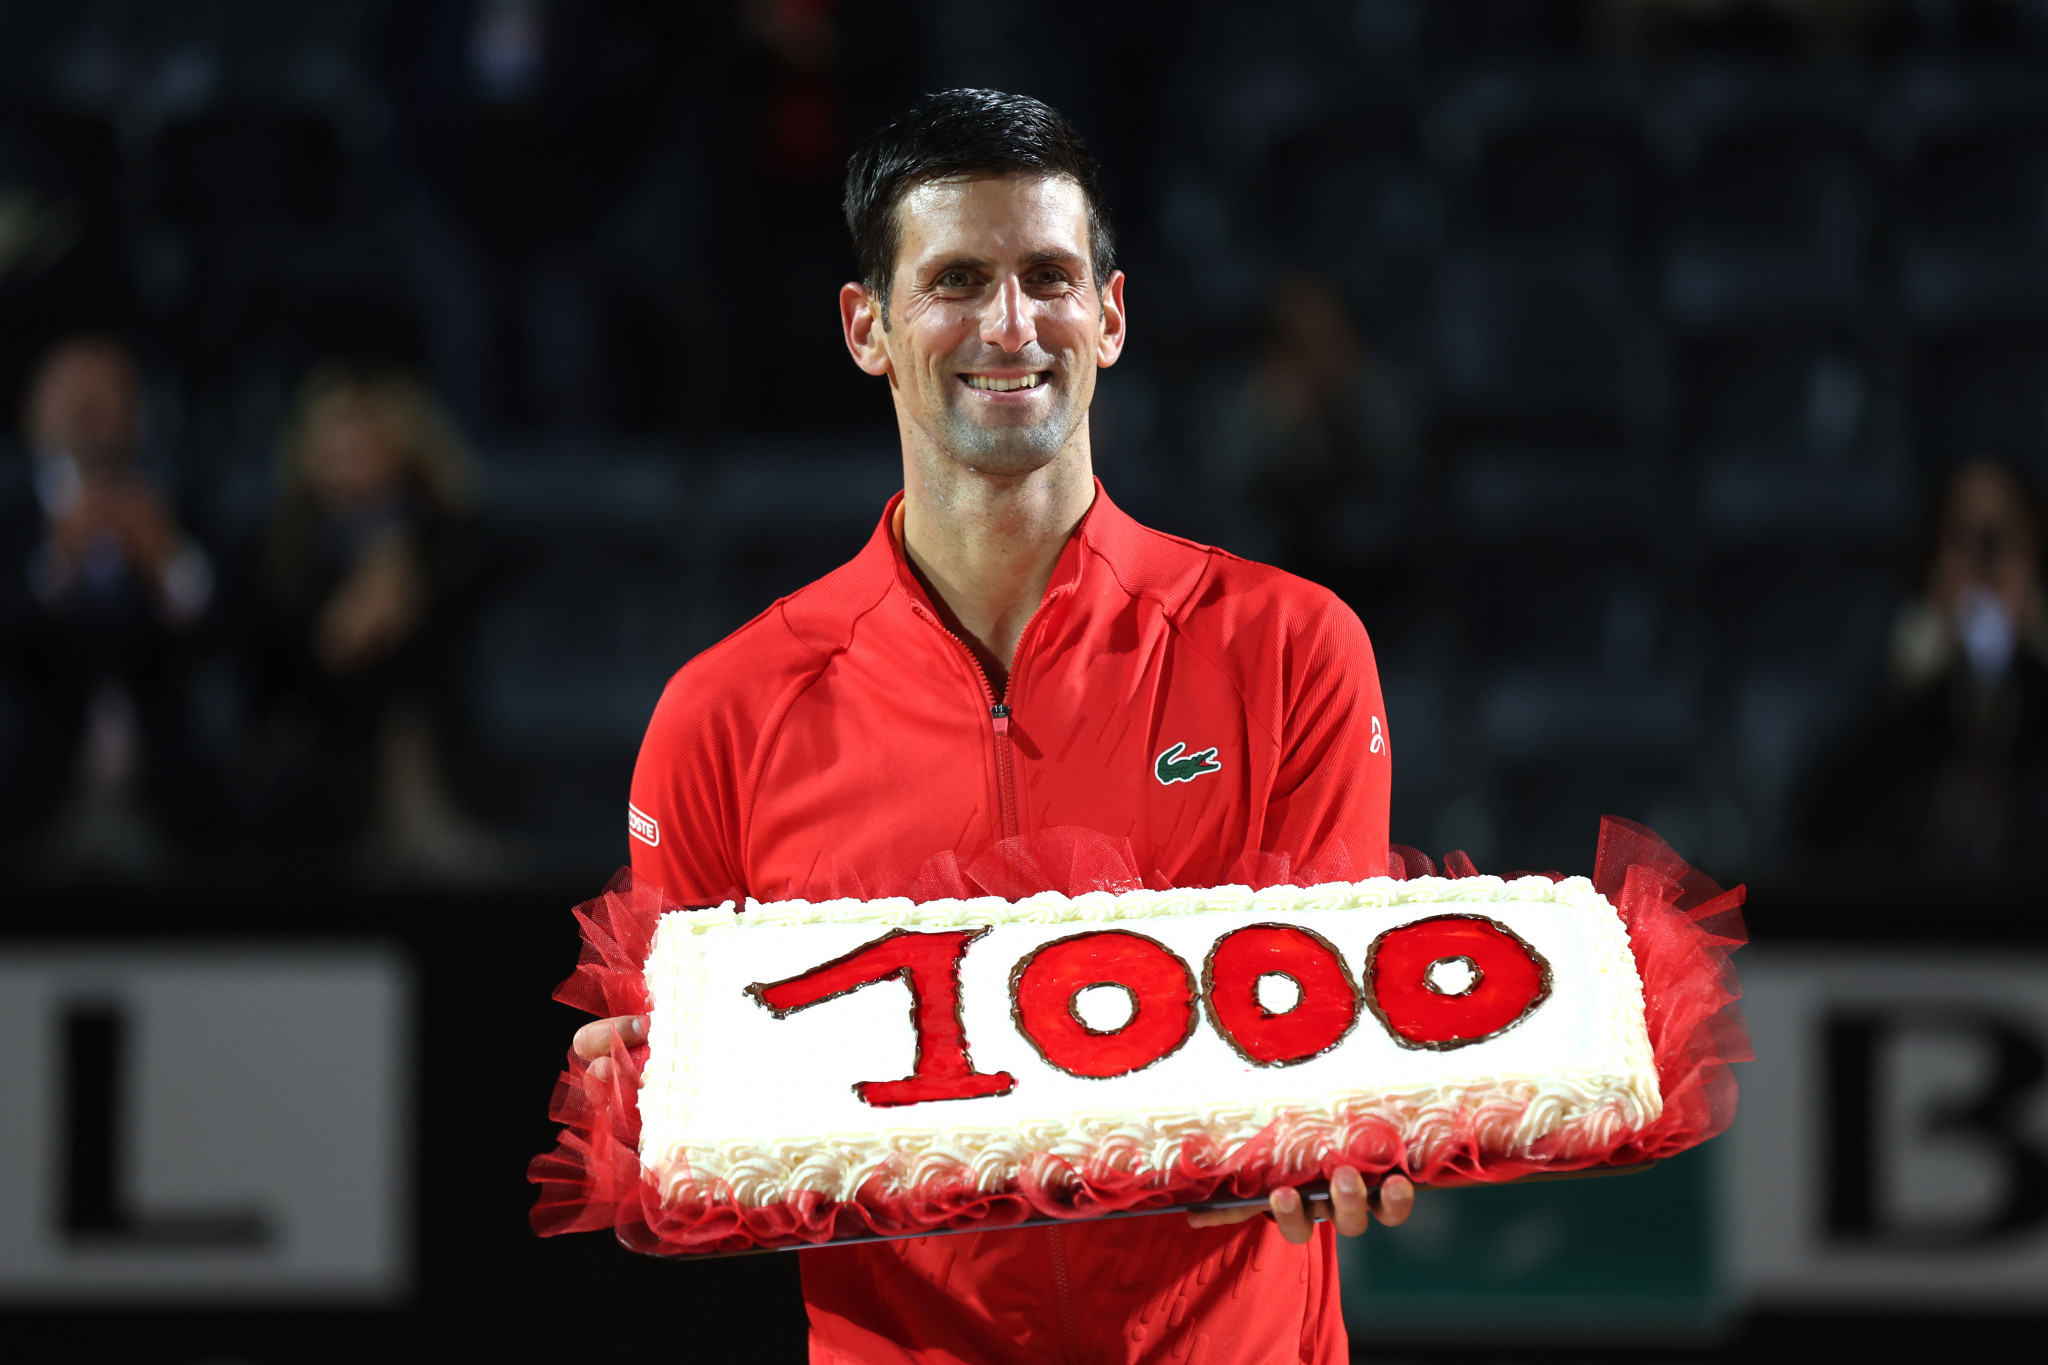 Novak Djokovic became the fifth player to reach 1,000 ATP match wins, achieving the feat in the last four in Rome ©Getty Images